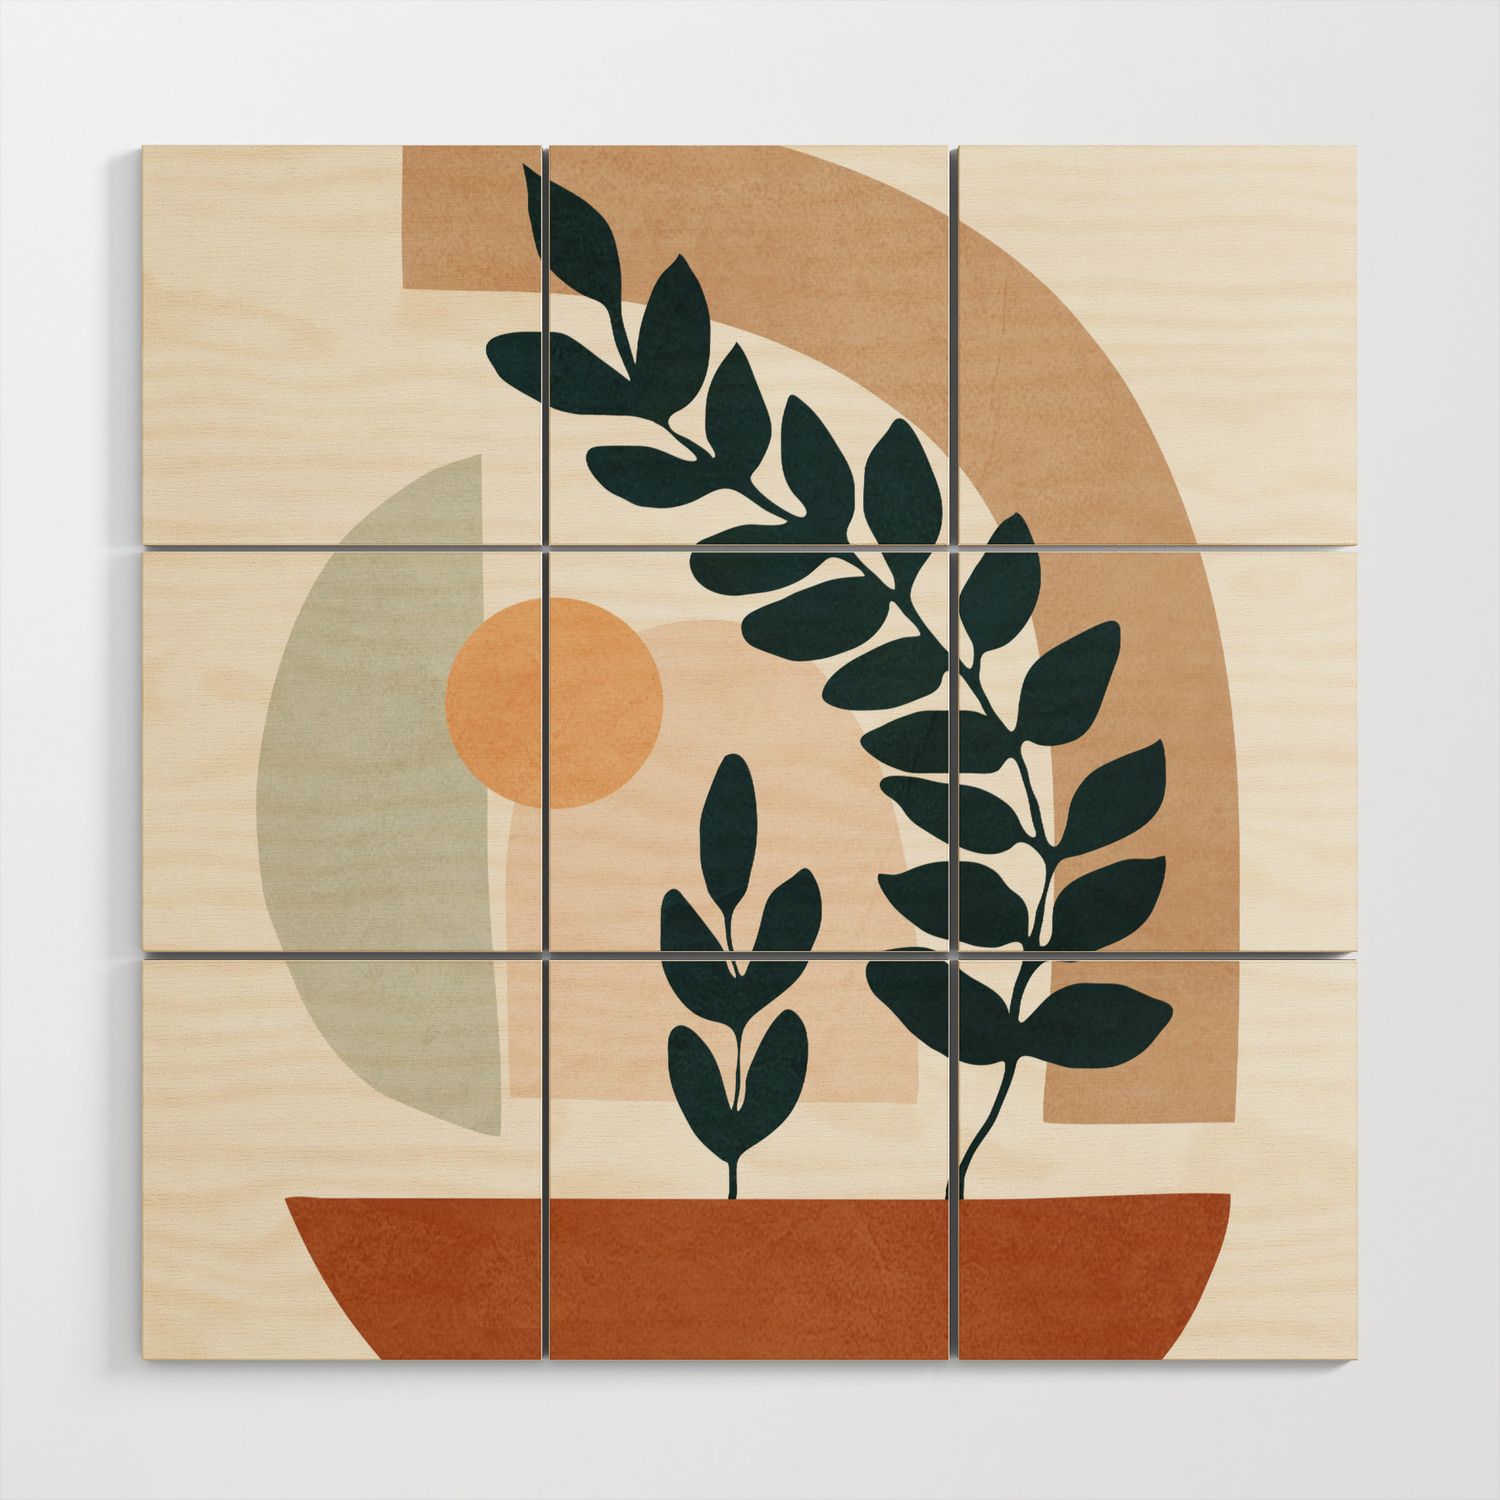 Soft Shapes Iii Wood Wall Artcity Art | Society6 Within Soft Shapes Wall Art (View 14 of 15)